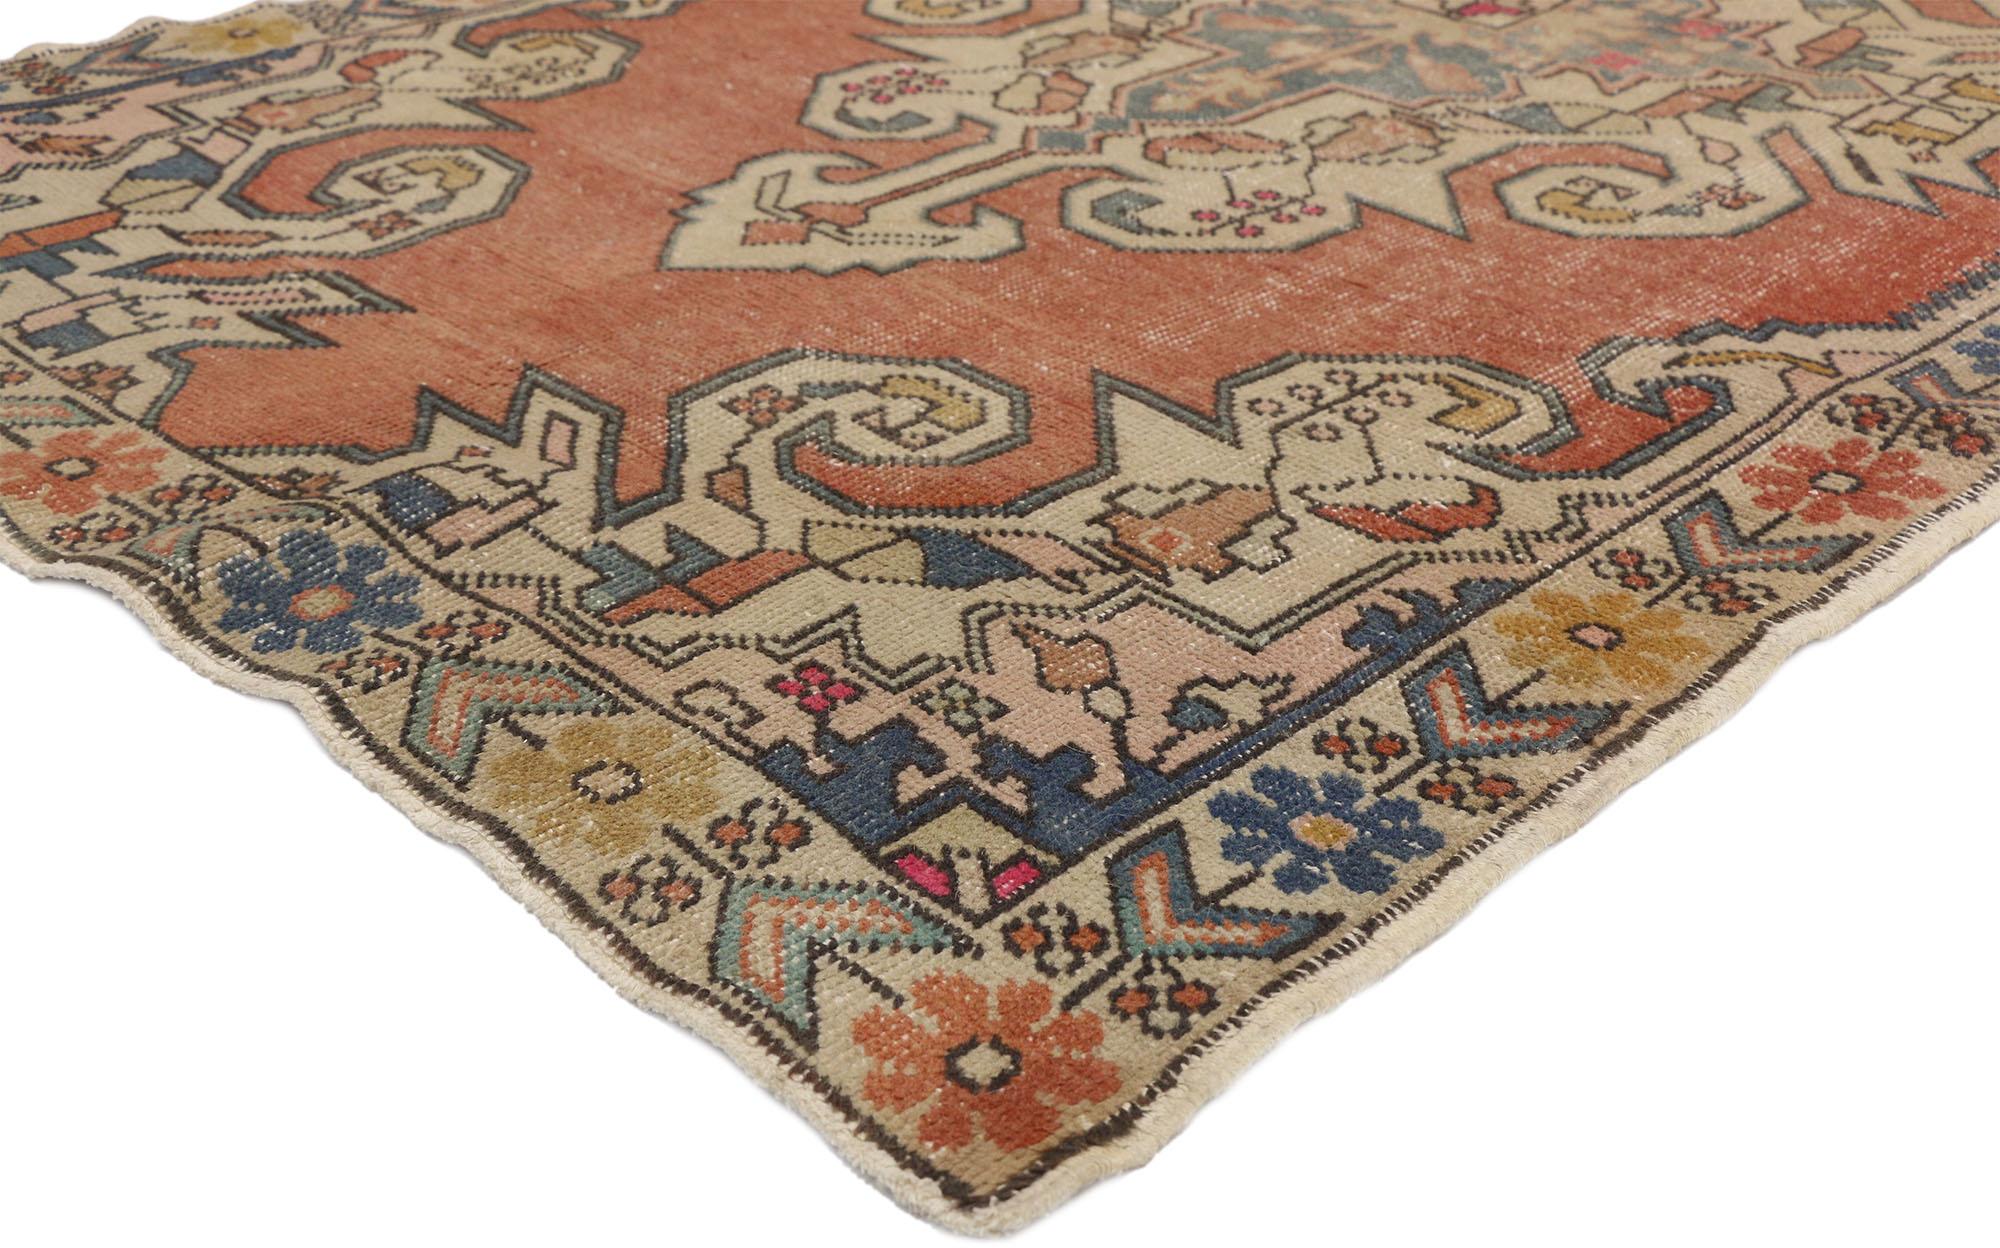 77222 Distressed Vintage Turkish Oushak rug with Italian Cottage Rustic Style 04'05 x 07'07. With warm terracotta hues and pops of blue, this hand knotted wool vintage Turkish Oushak rug beautifully embodies an Italian Rustic style. It features a